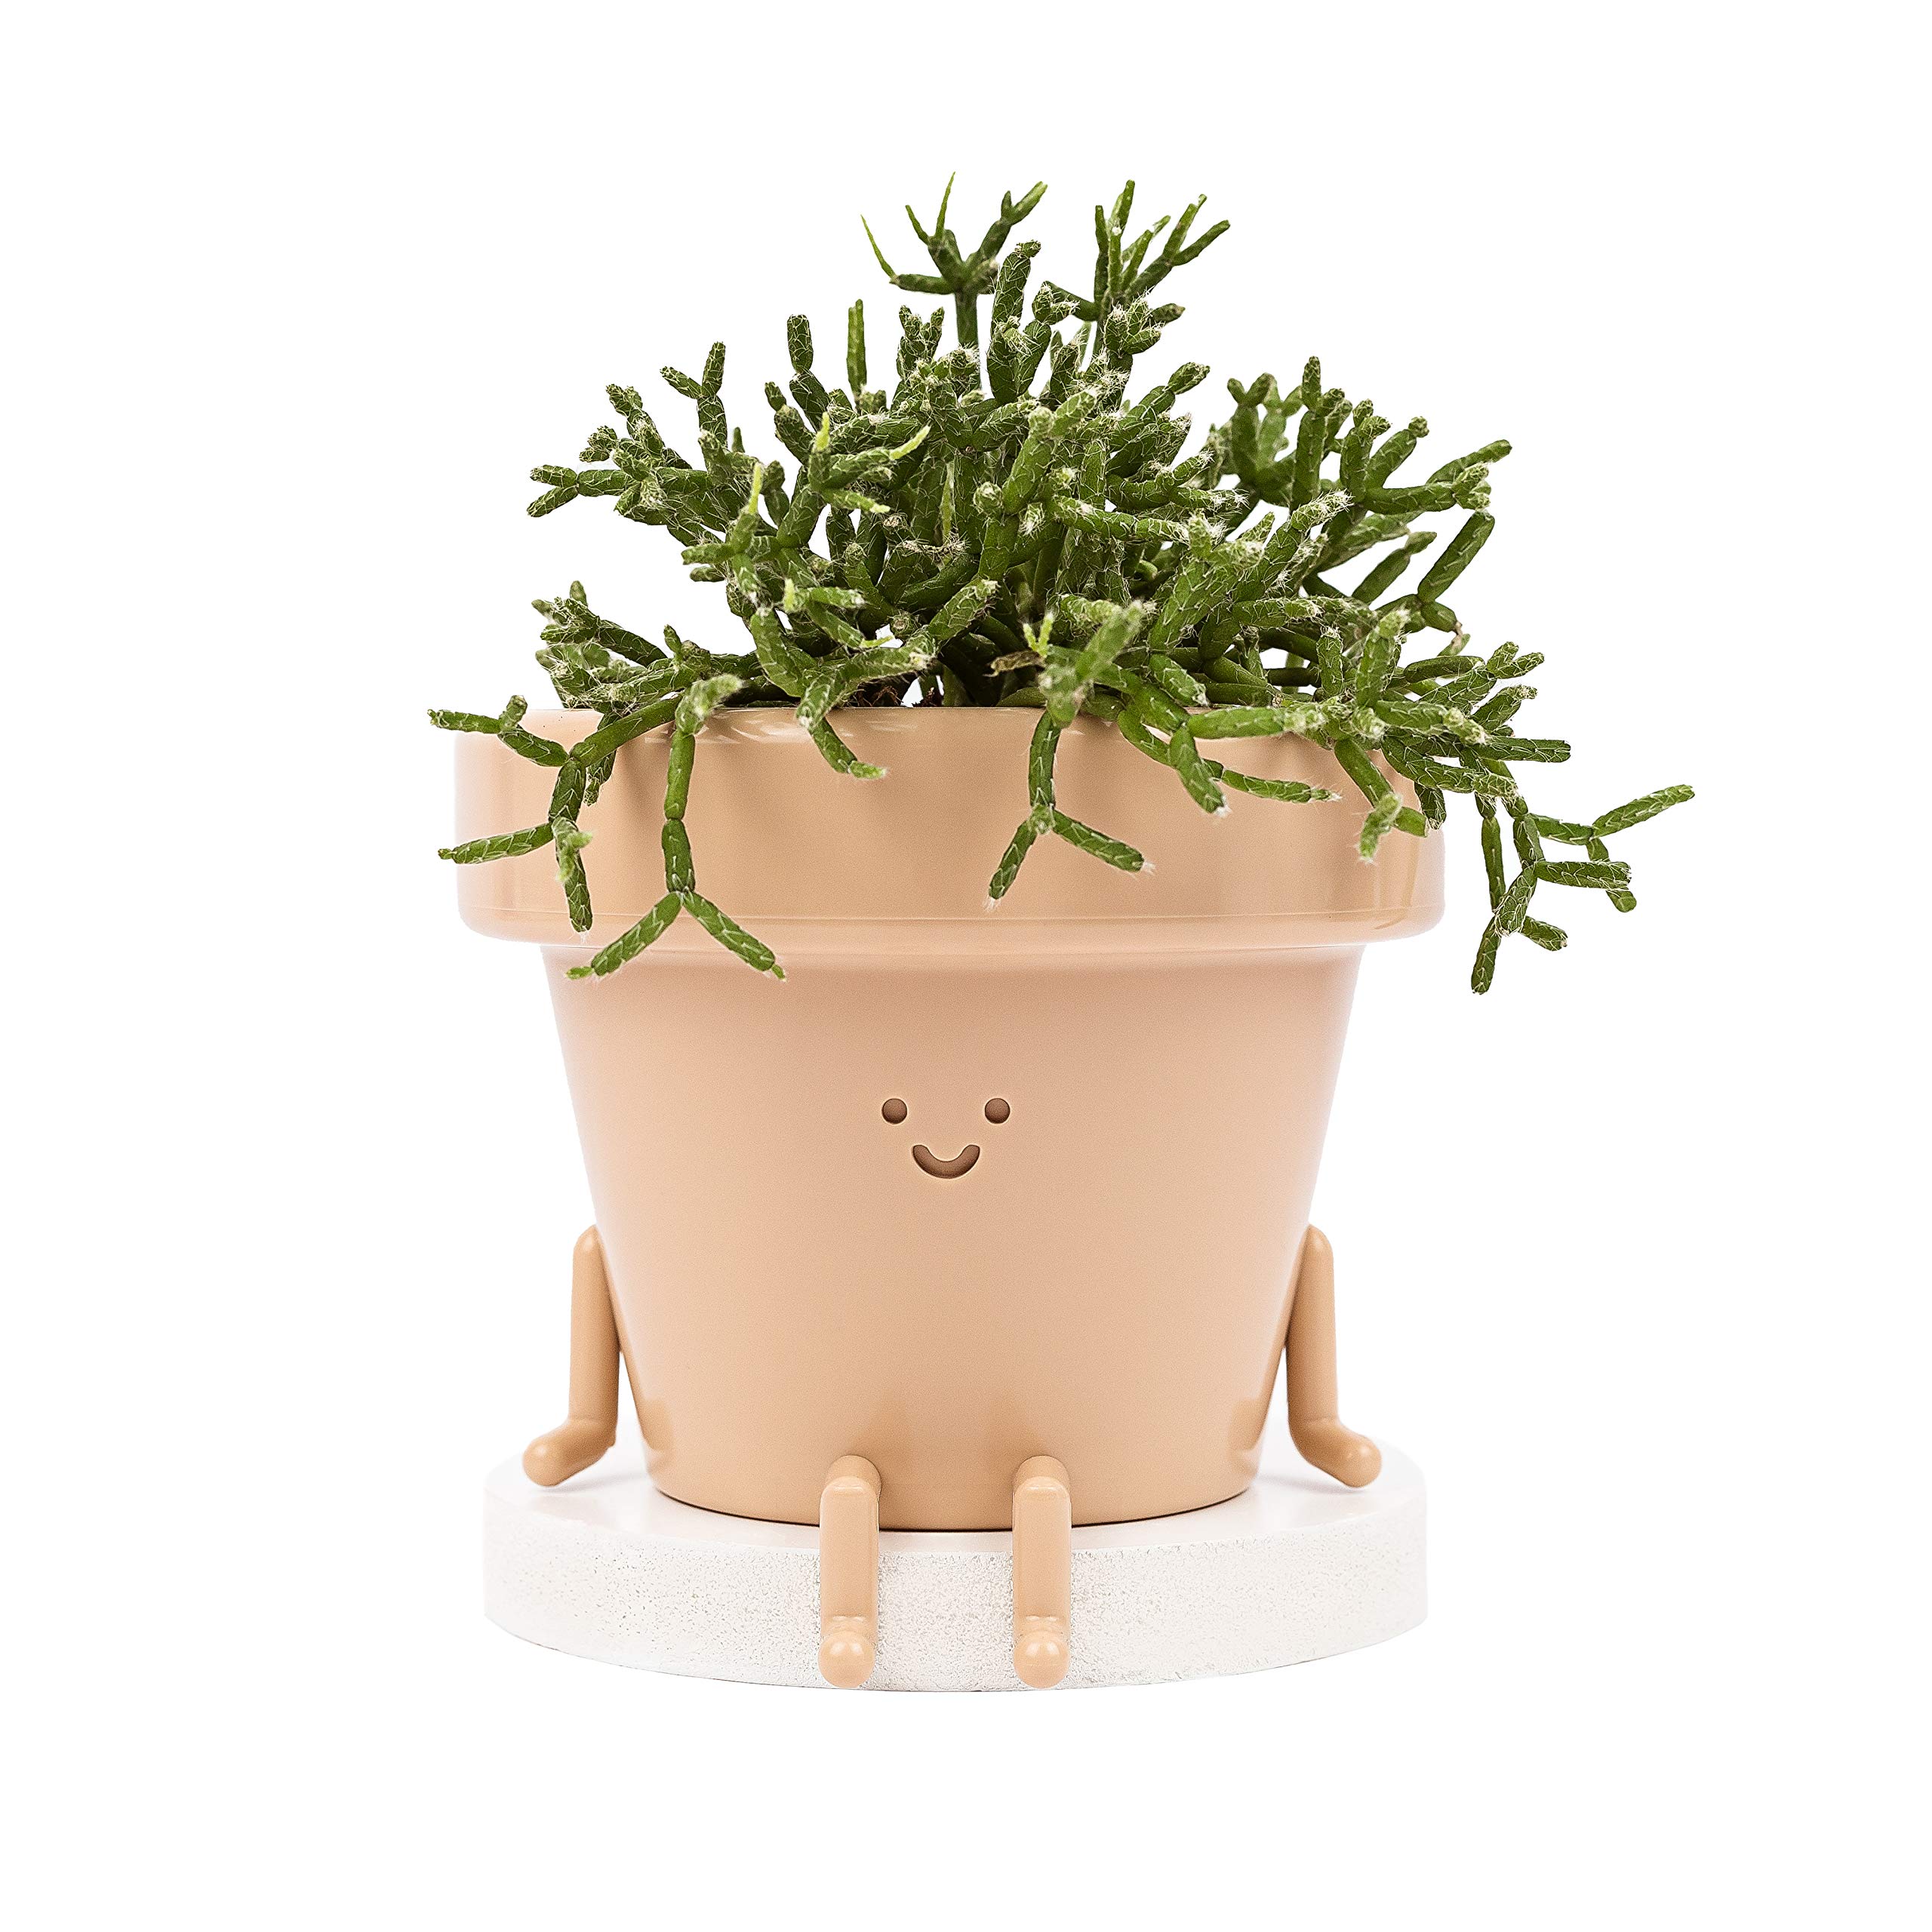 Original Earthlings + Sitting Indoor Plant Pot With Face